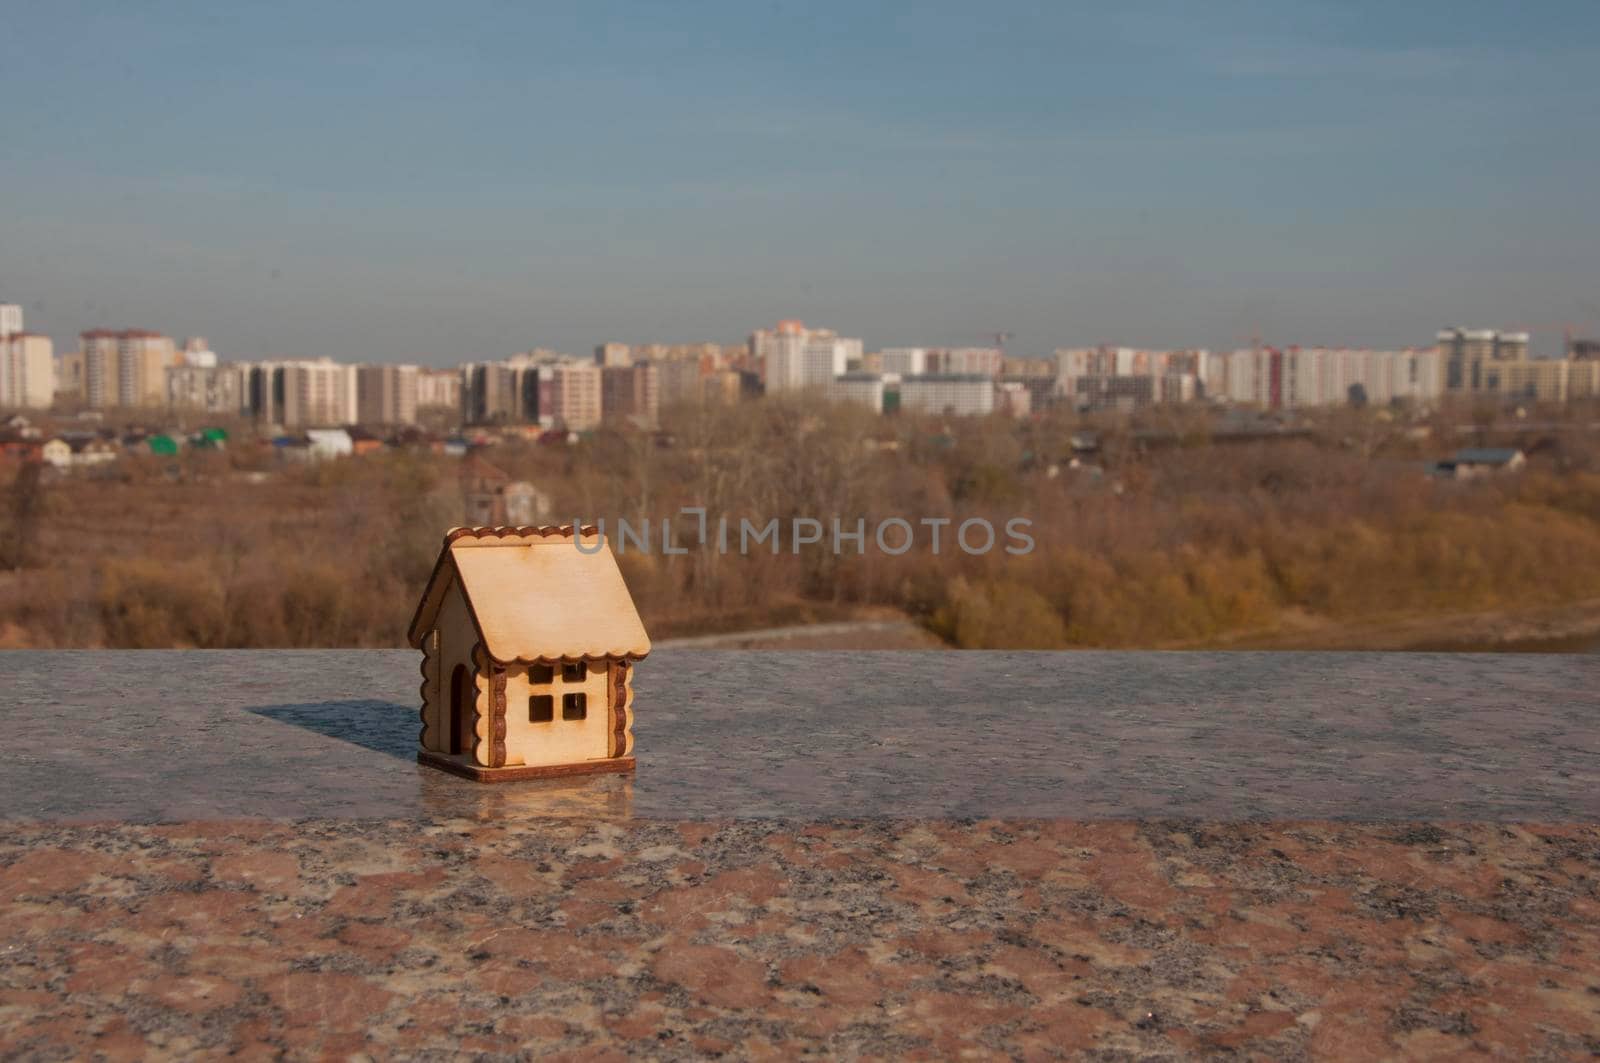 Miniature wooden house outdoor nature. Real estate concept. Modern housing. Eco-friendly energy efficient house. Buying home outside the city Fresh air. Mortgage, loan.